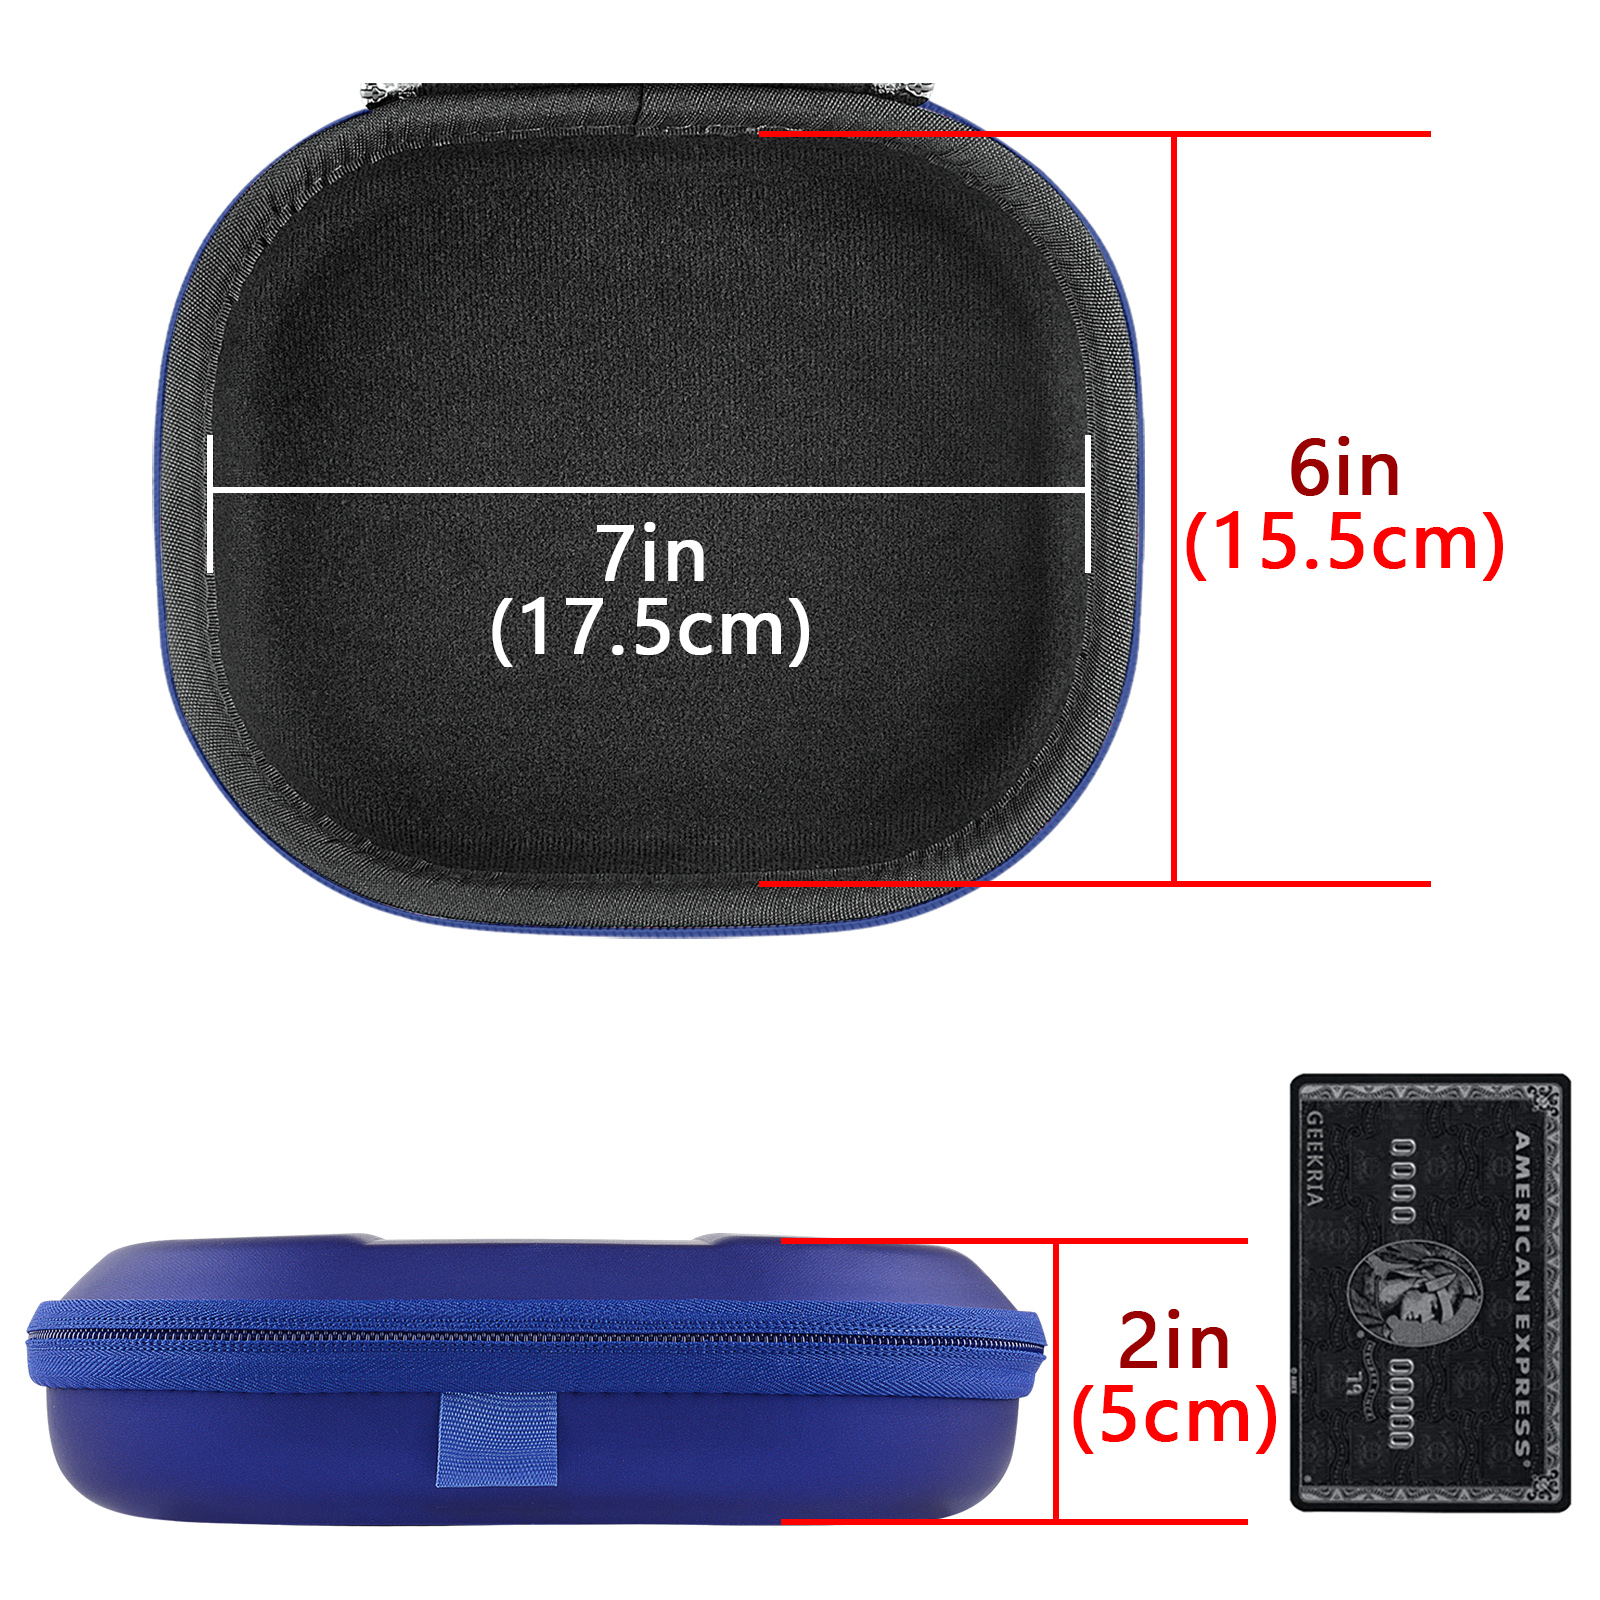 Geekria Hard Case for Sony Headphones (Blue)